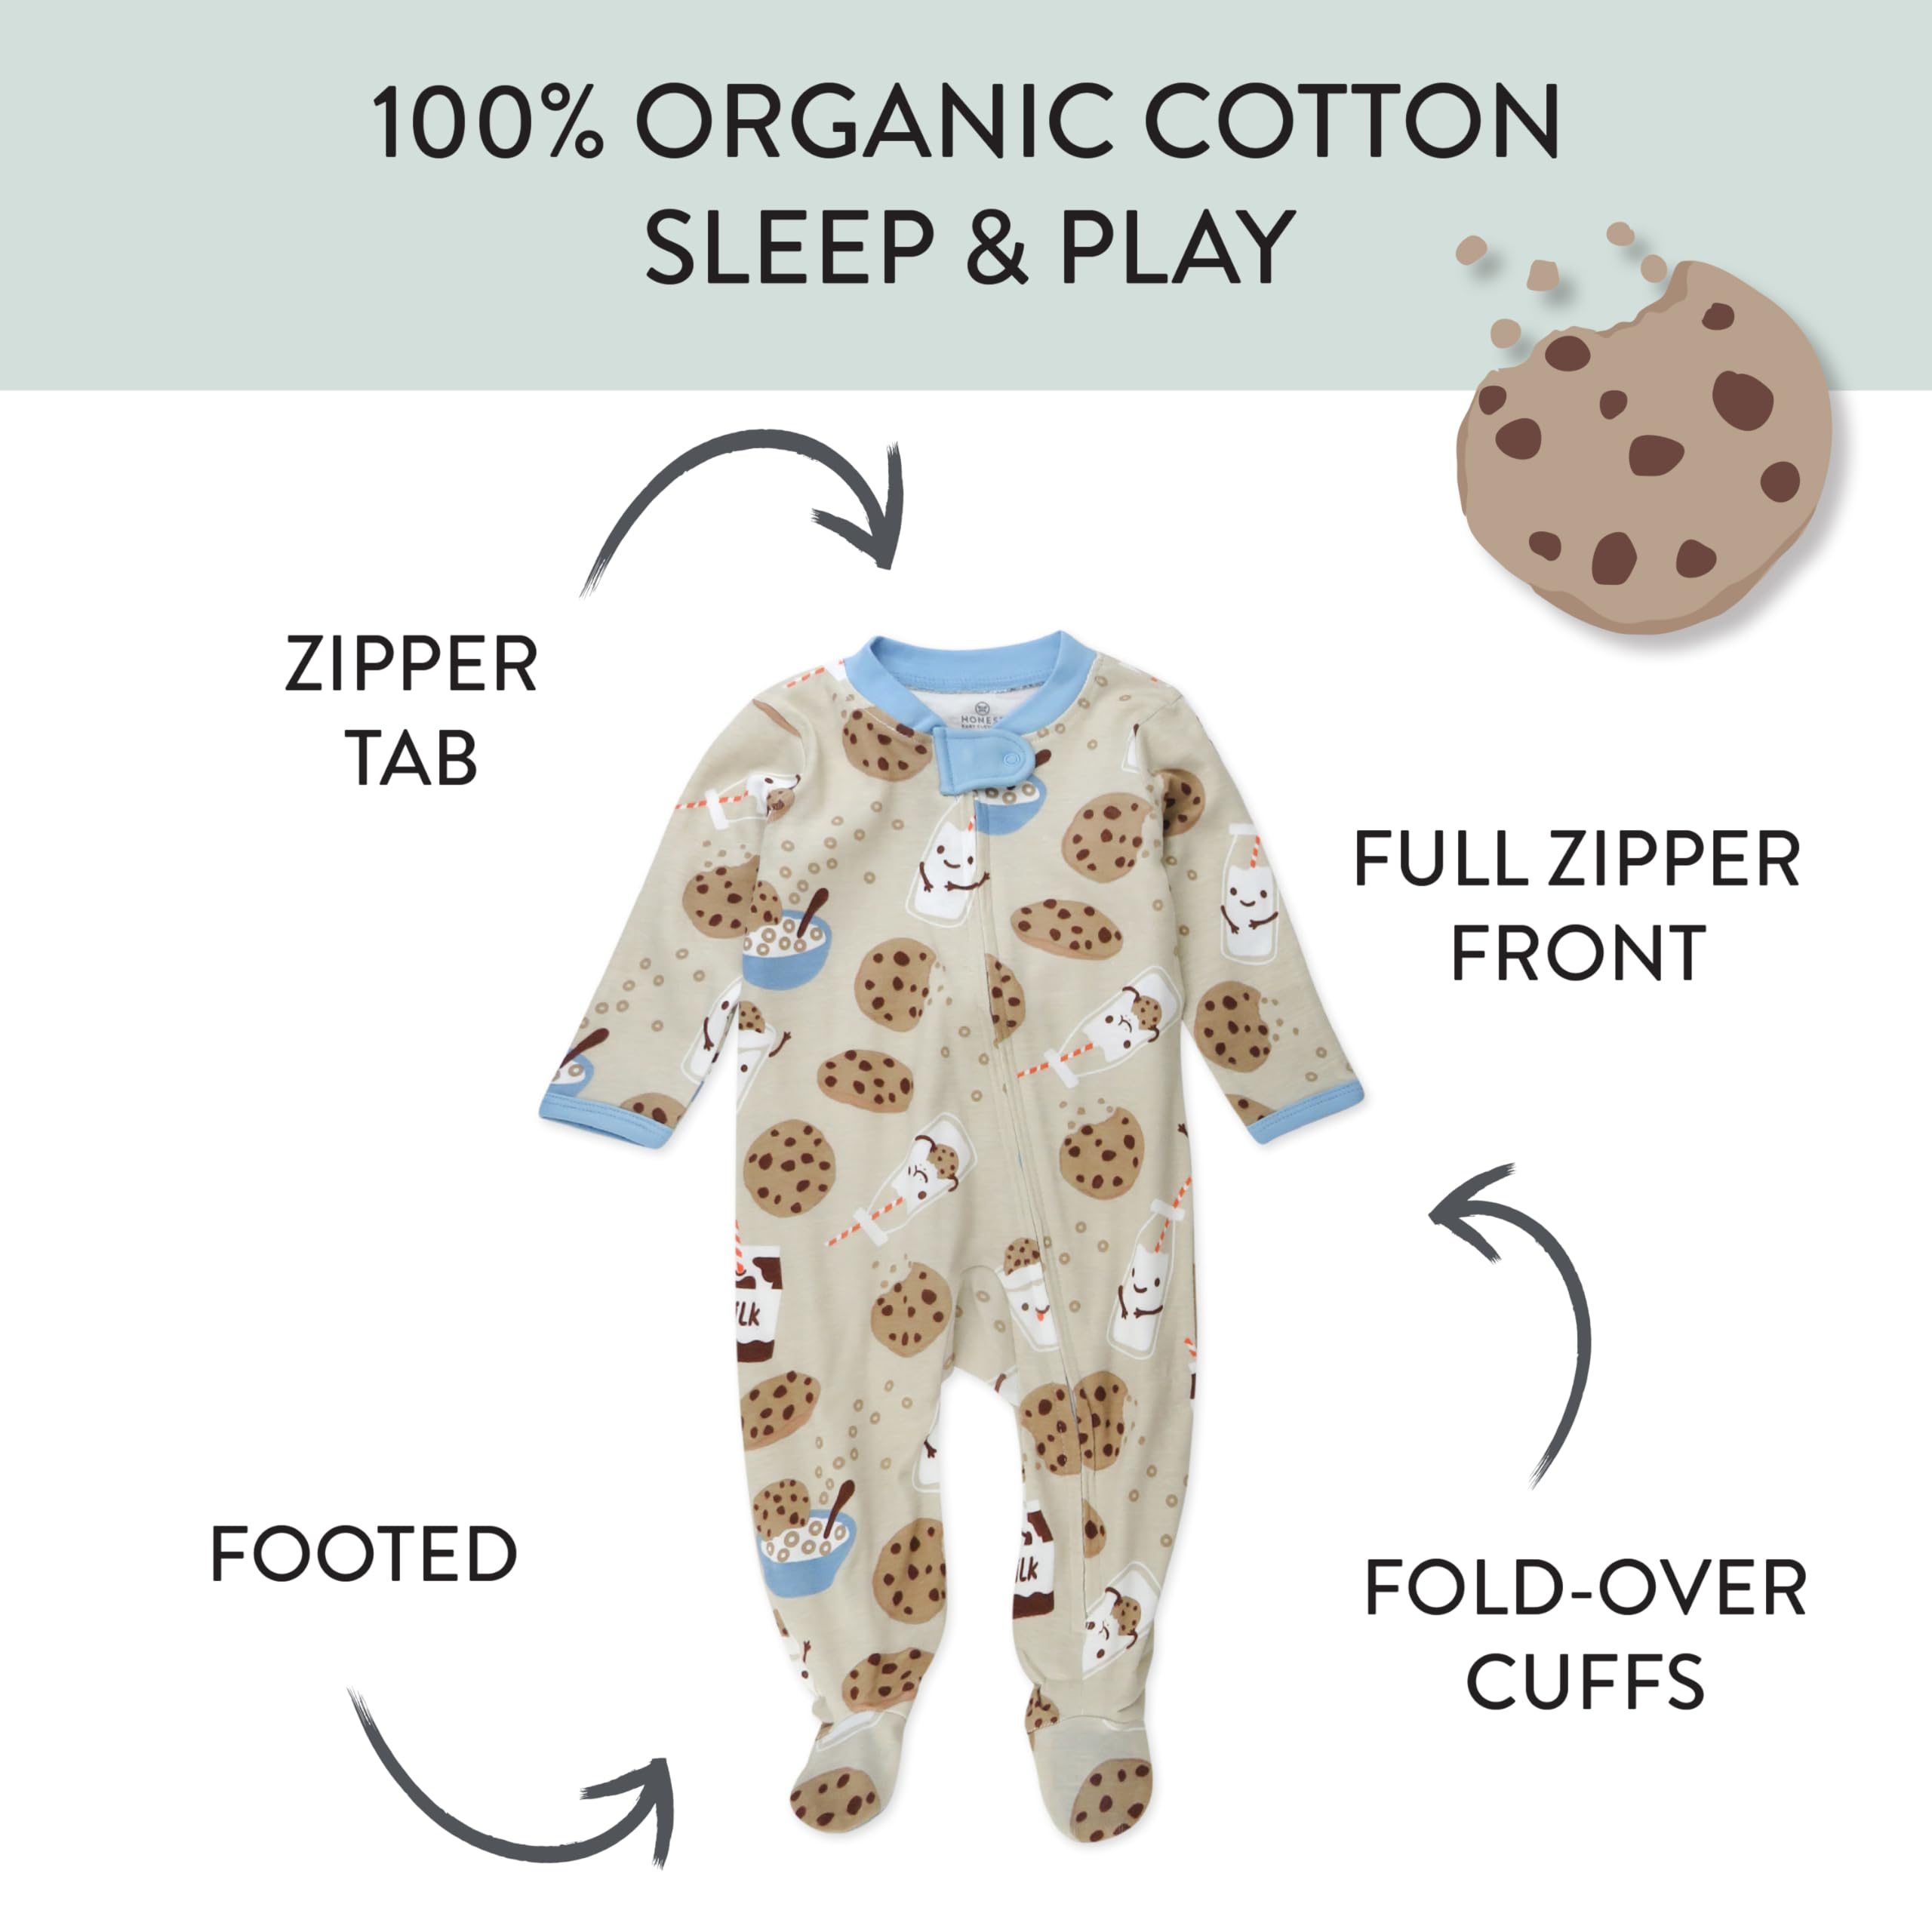 HonestBaby Sleep and Play Footed Pajamas One-Piece Sleeper Jumpsuit Zip-Front Pjs Organic Cotton for Baby Boys, Unisex